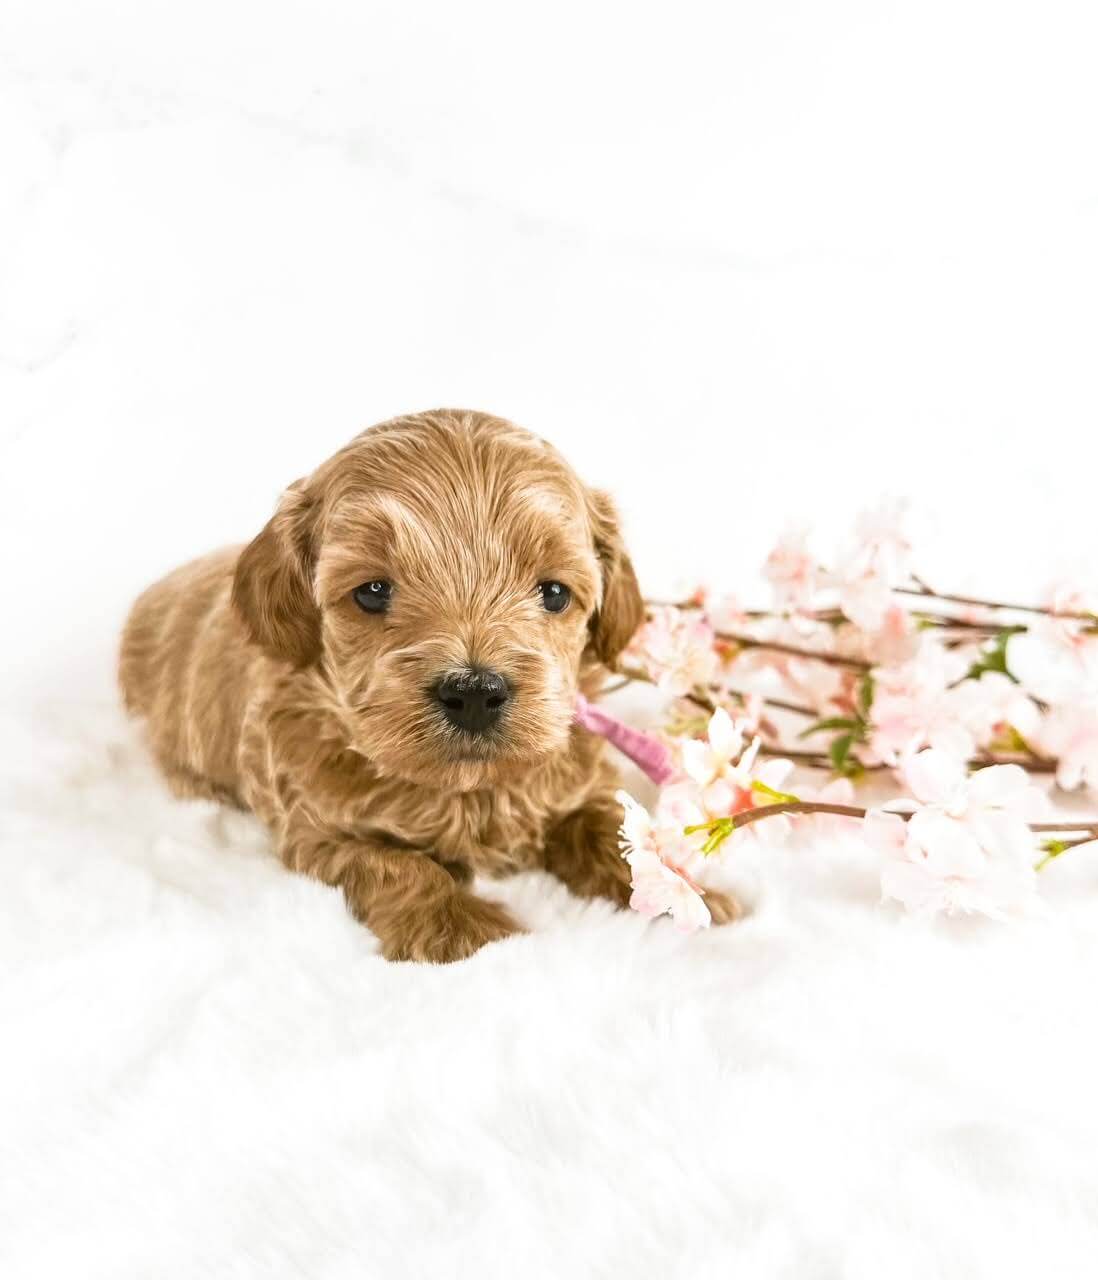 A small, adorable puppy sits gracefully on a pristine white background, surrounded by delicate pink flowers.